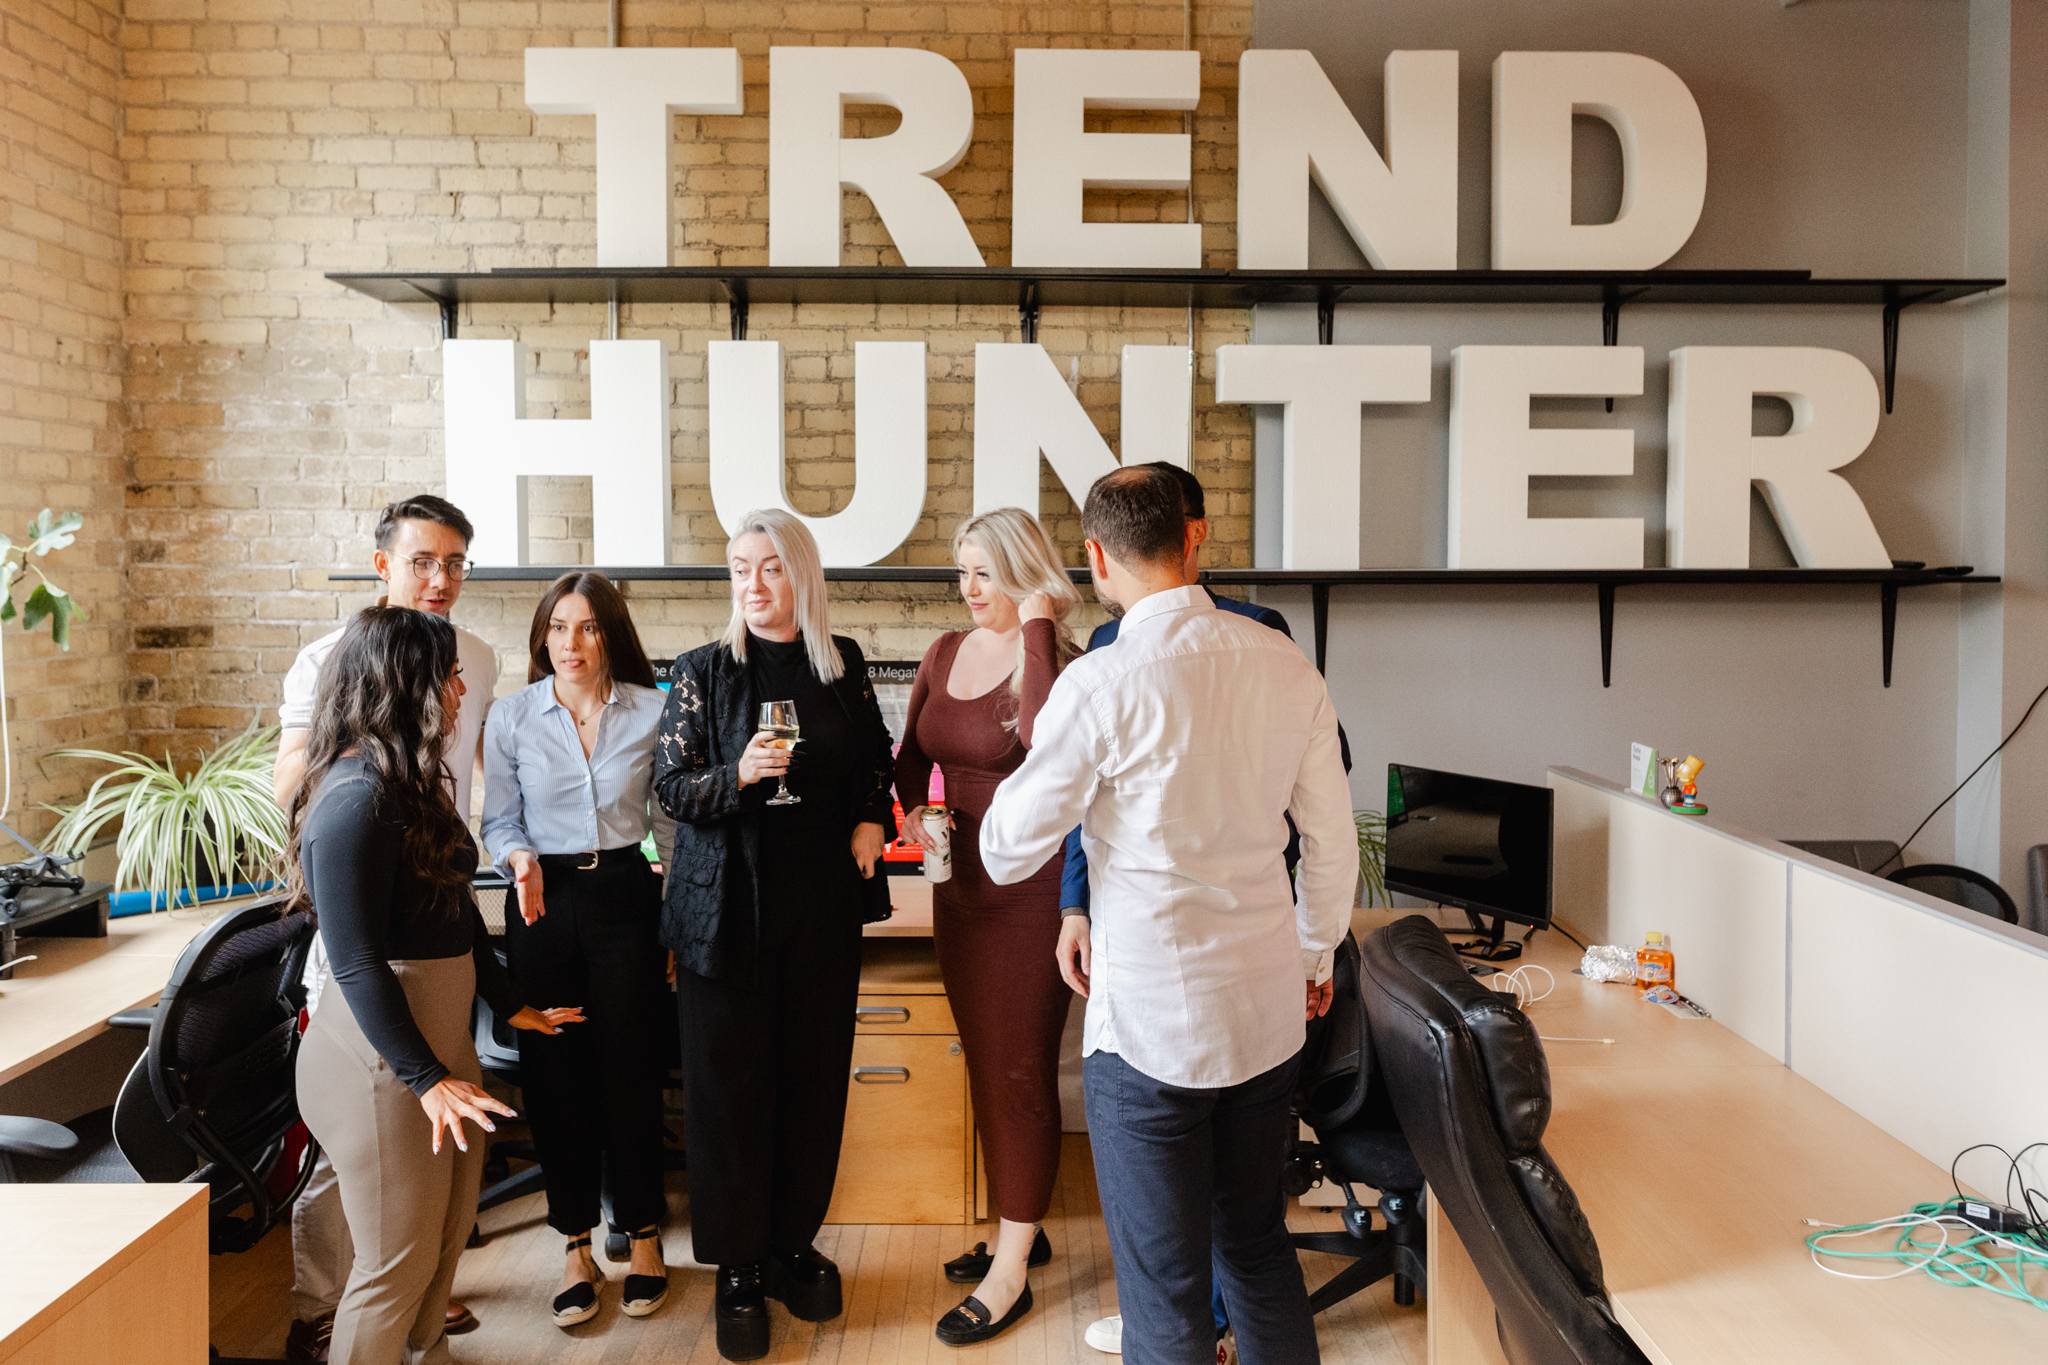 An event photographer capturing a group of people standing in front of a trend hunter sign.